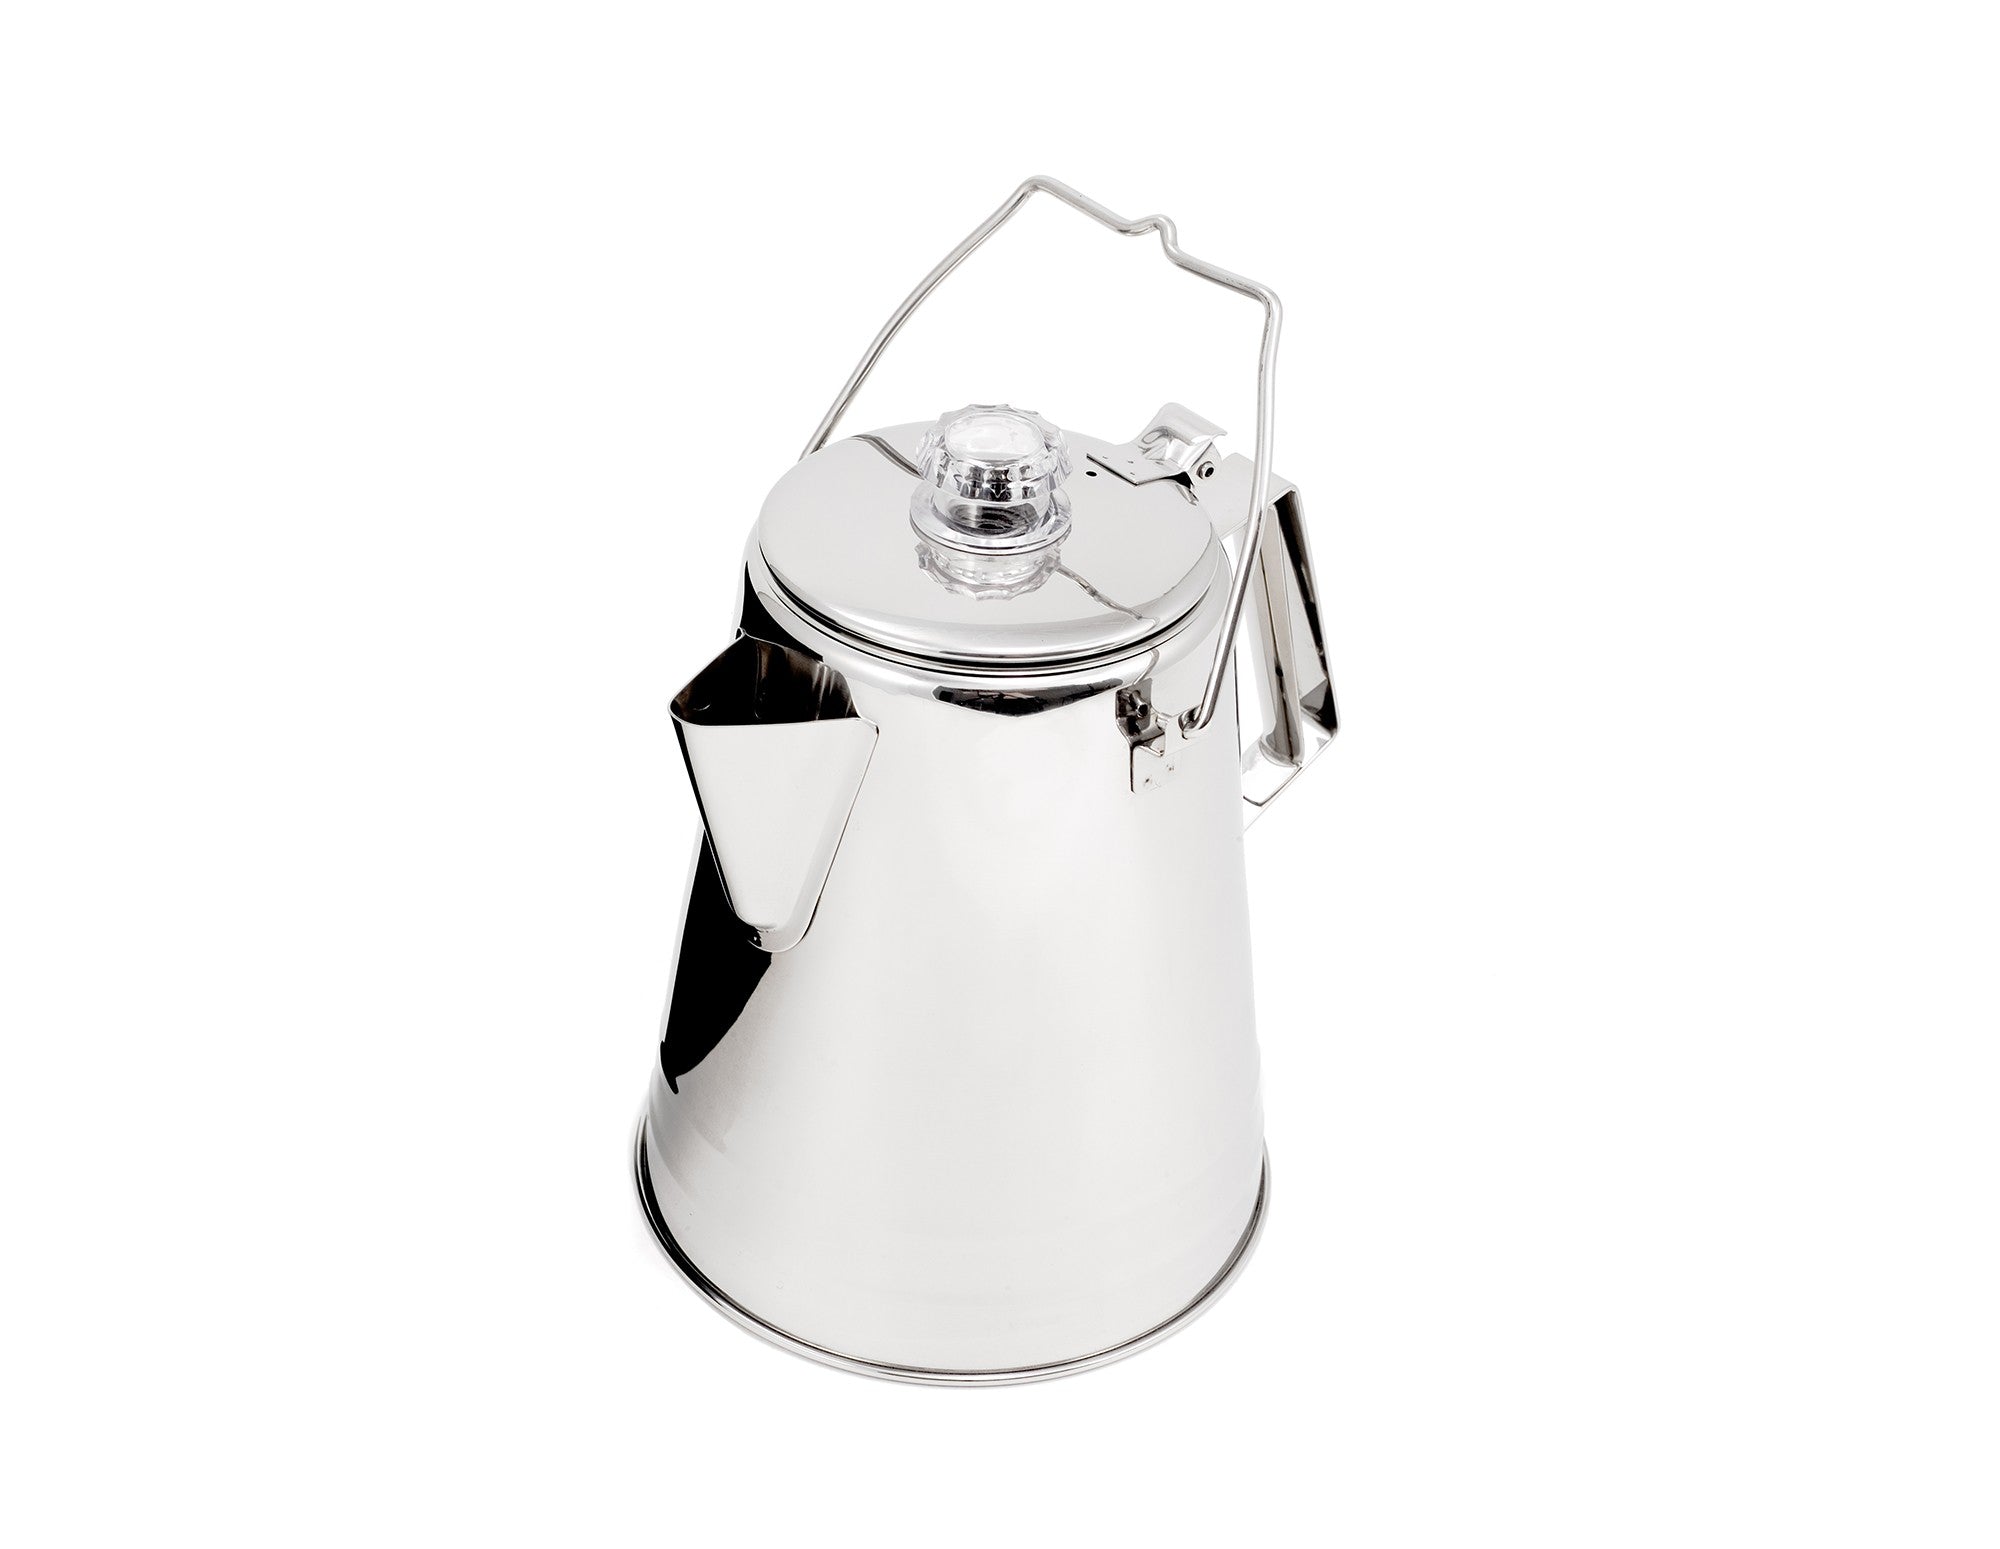 Glacier Stainless 3 Cup Percolator Coffee Pot – Atomic 79